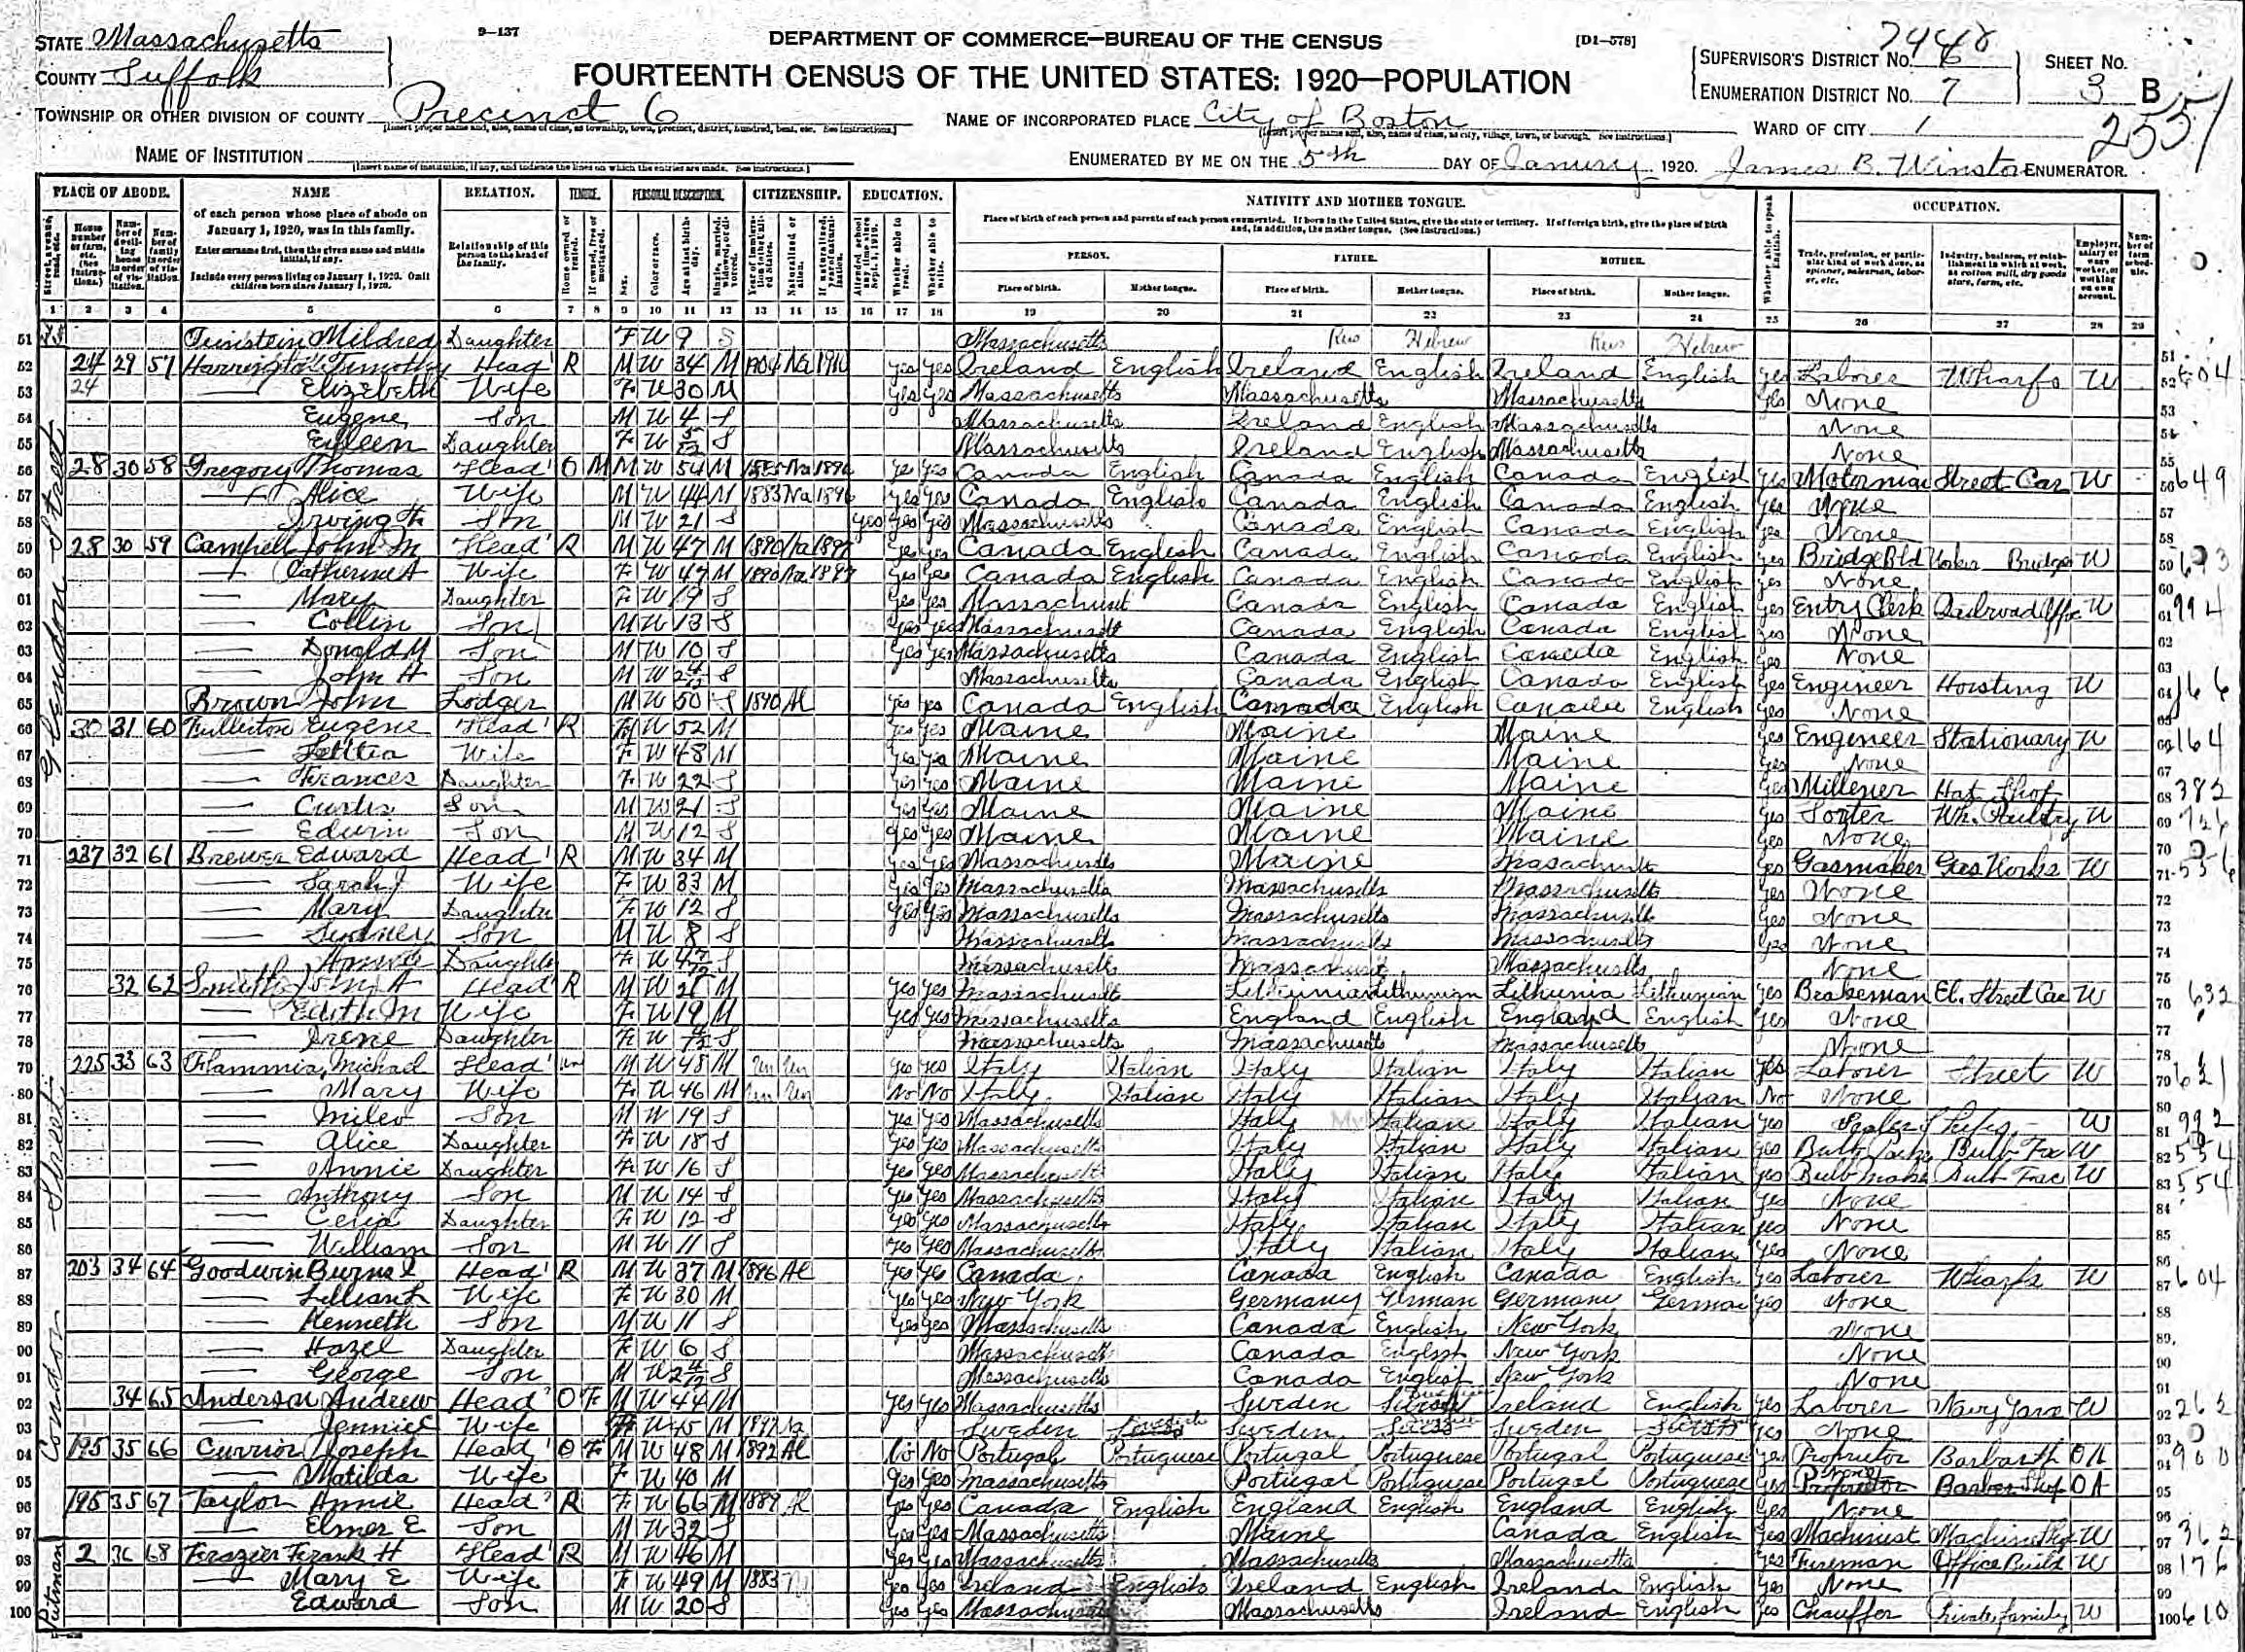 Image of a 1920 census page